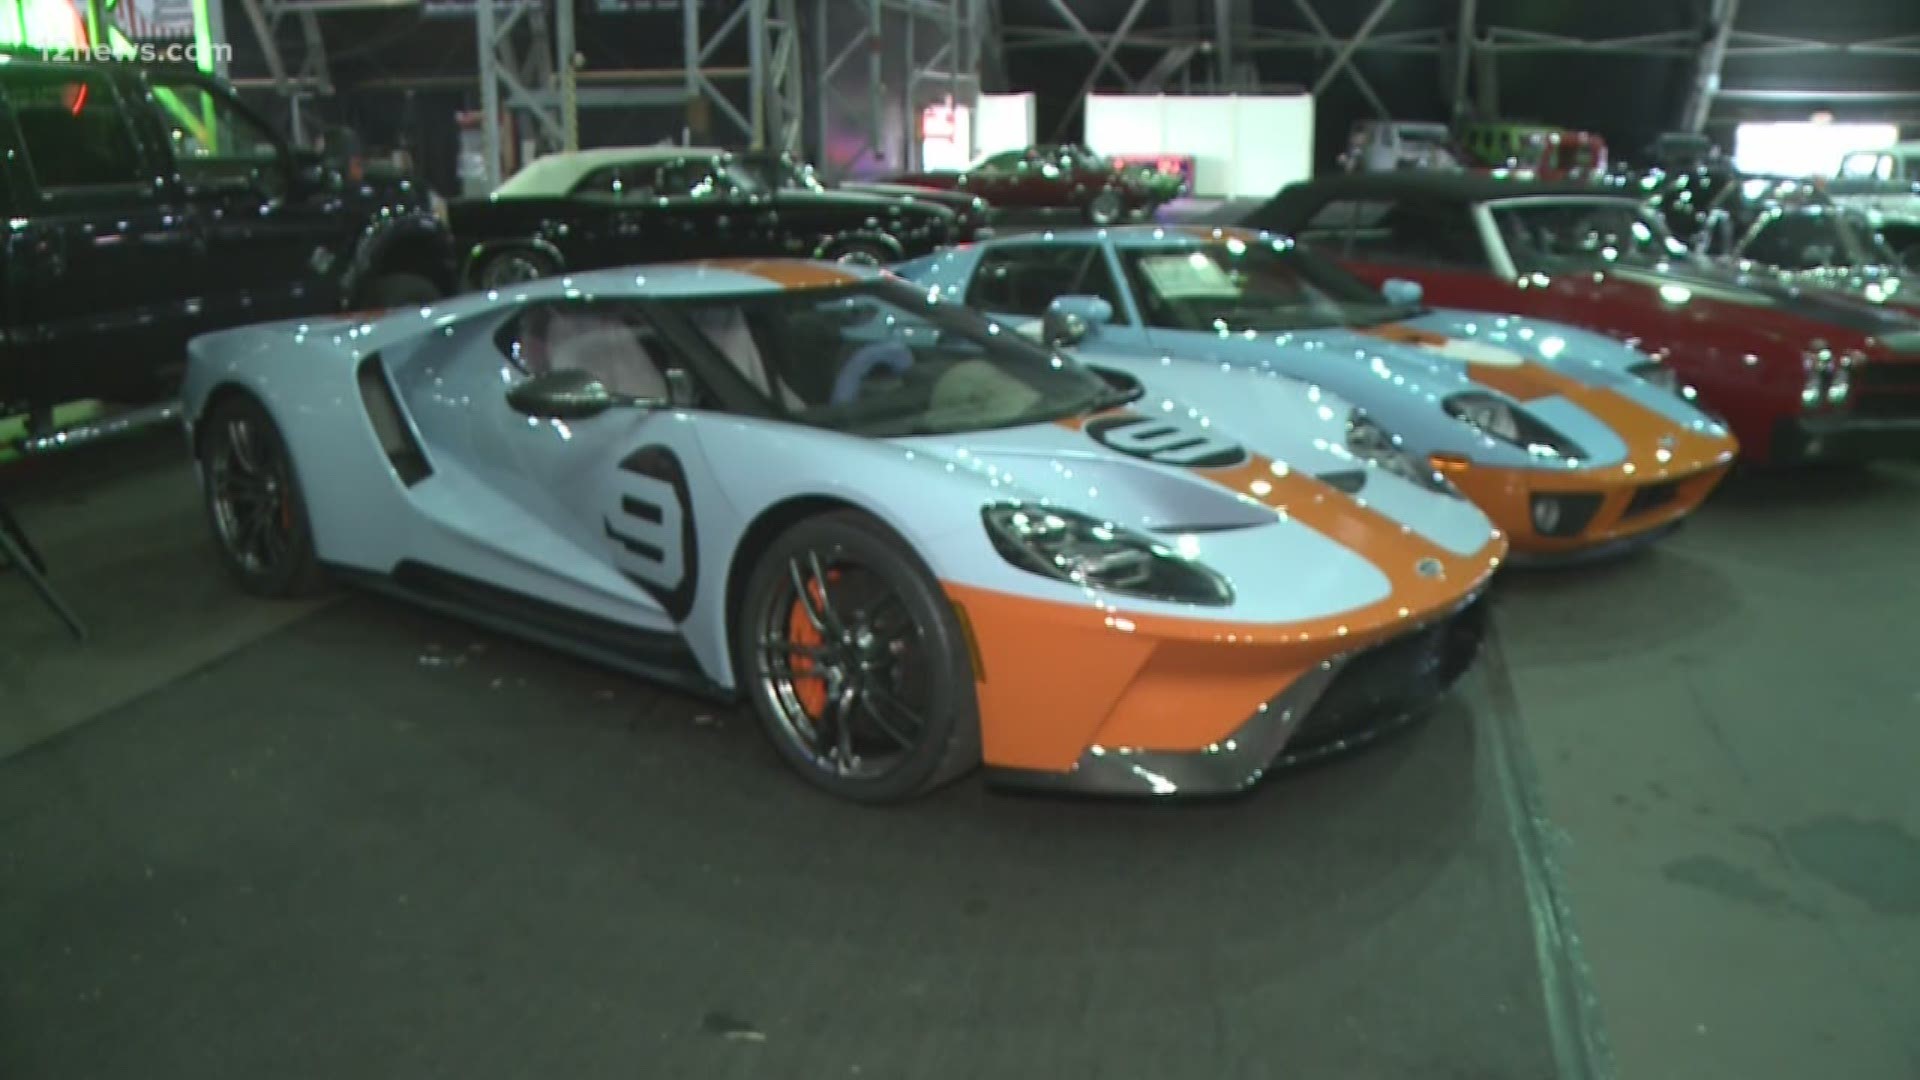 Before the cars go on sale, 12 News is getting a preview of the rarest and priciest cars.